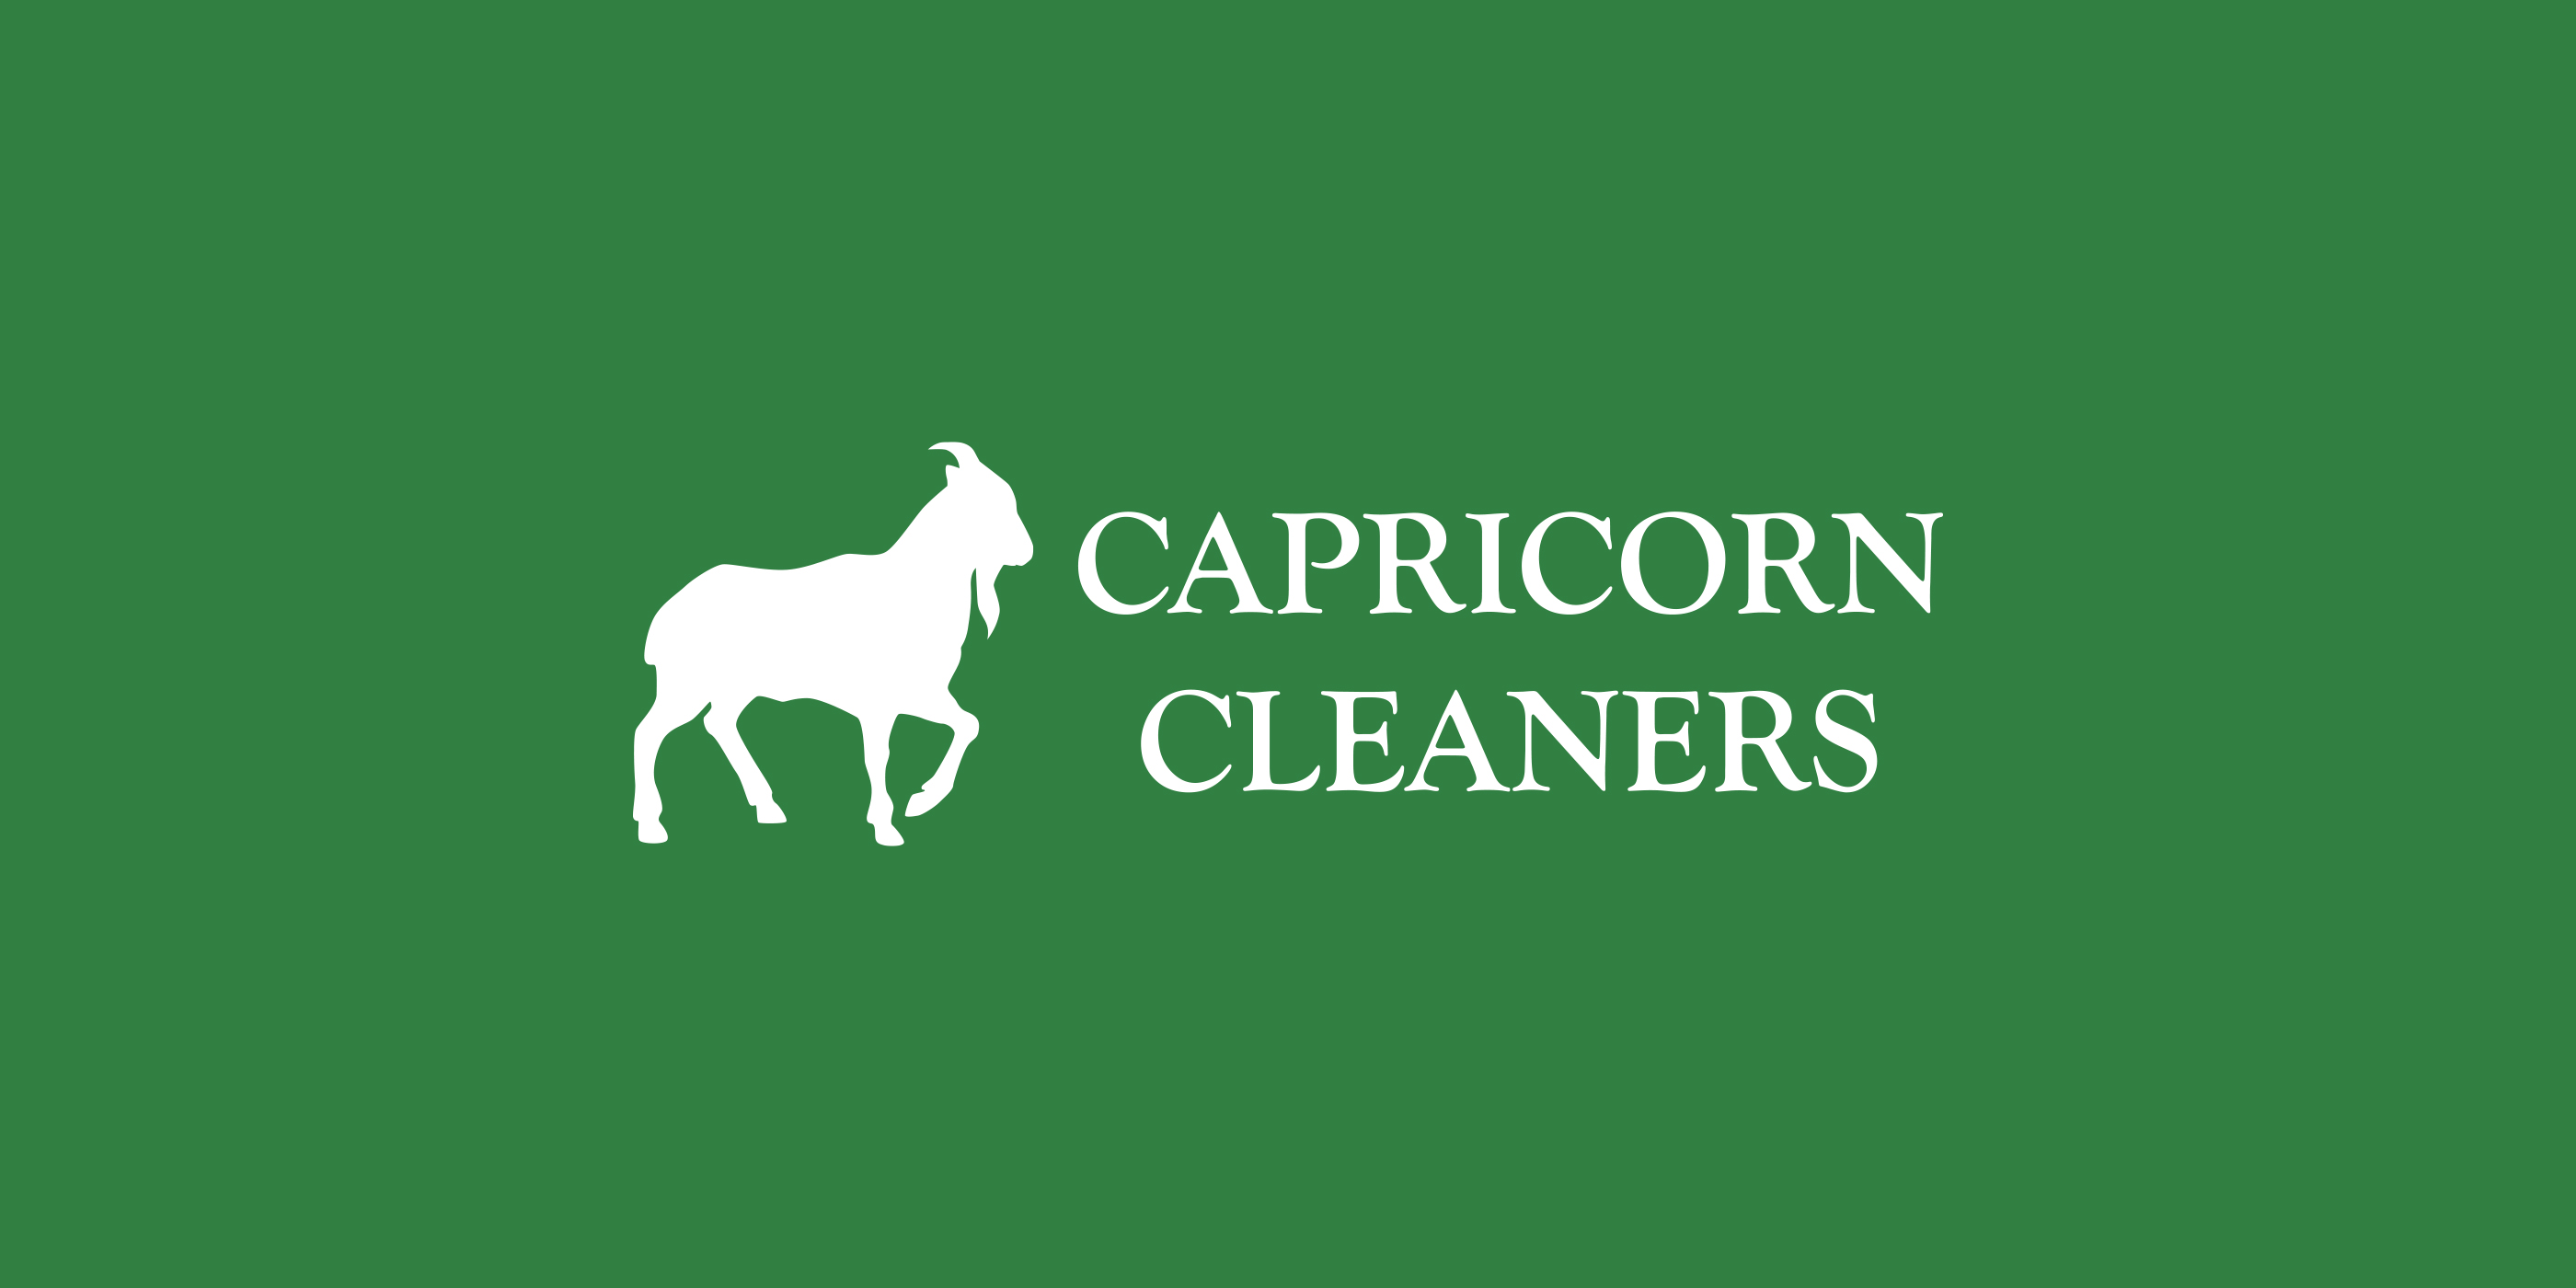 Capricorn Cleaners, print design and website design